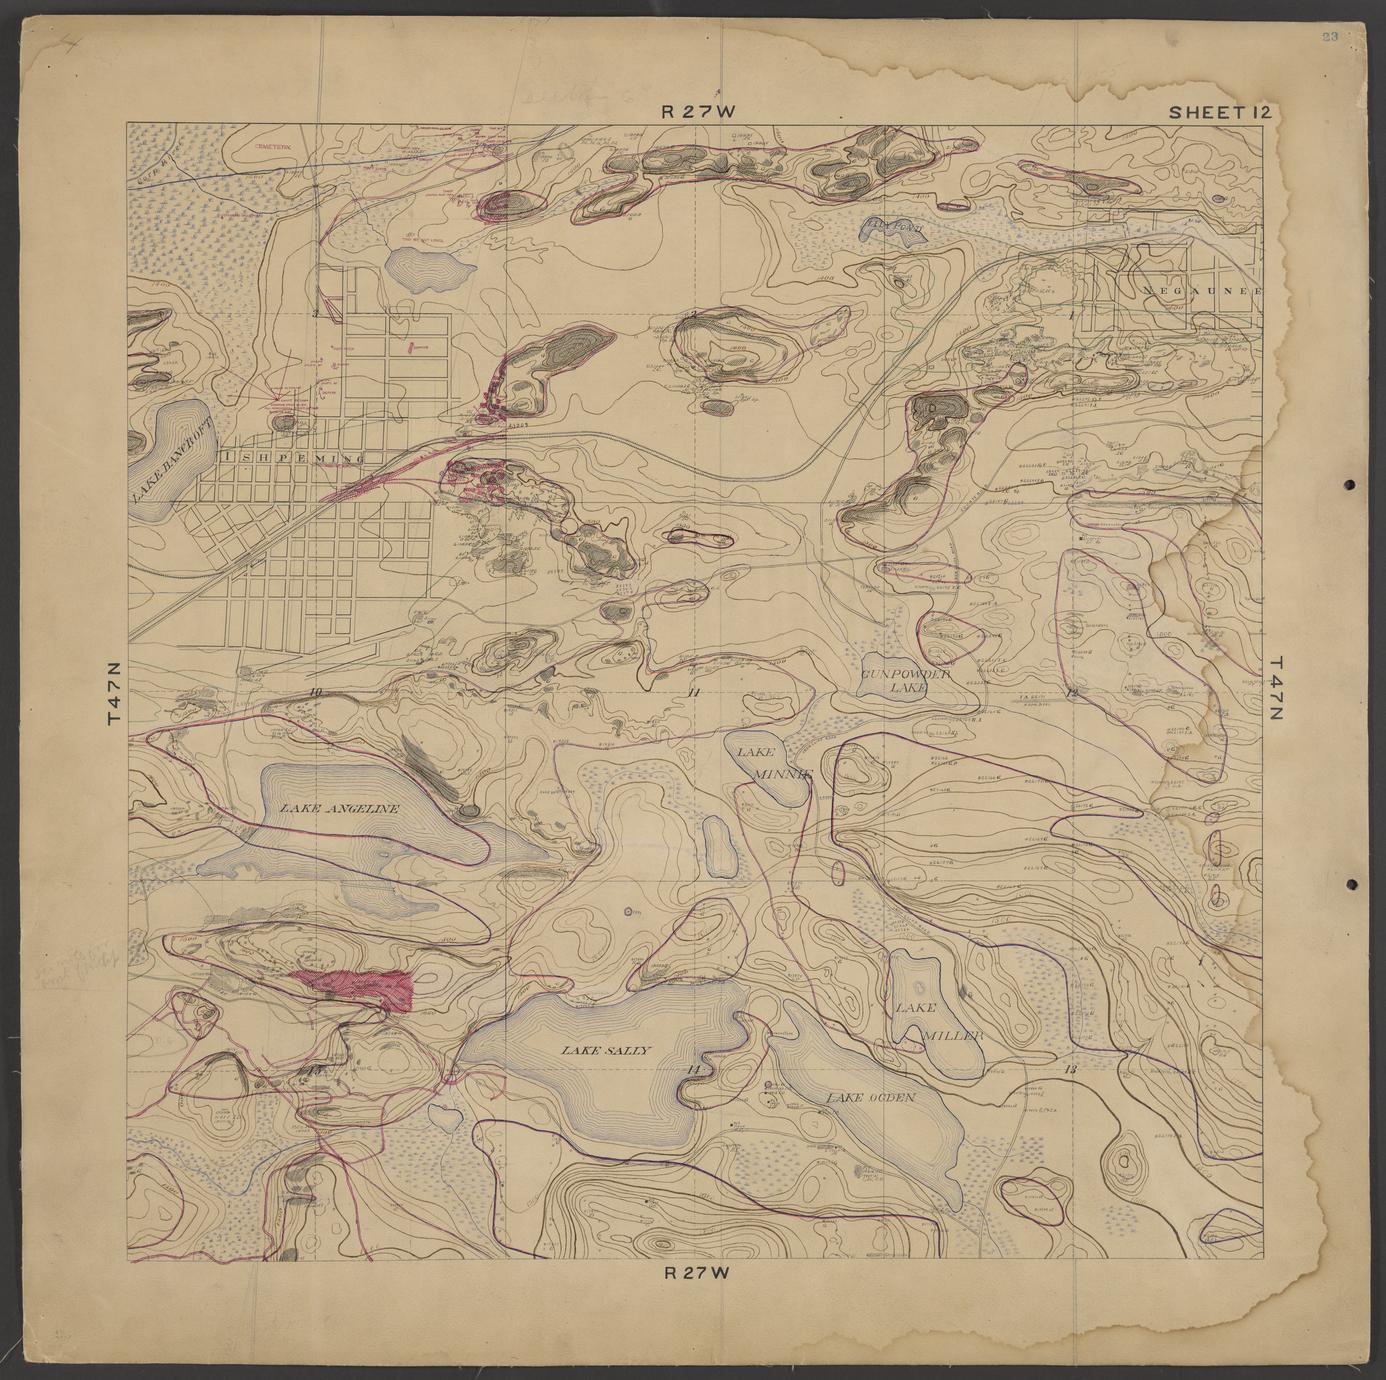 Geological map of Ishpeming and Negaunee (Marquette County, Michigan)